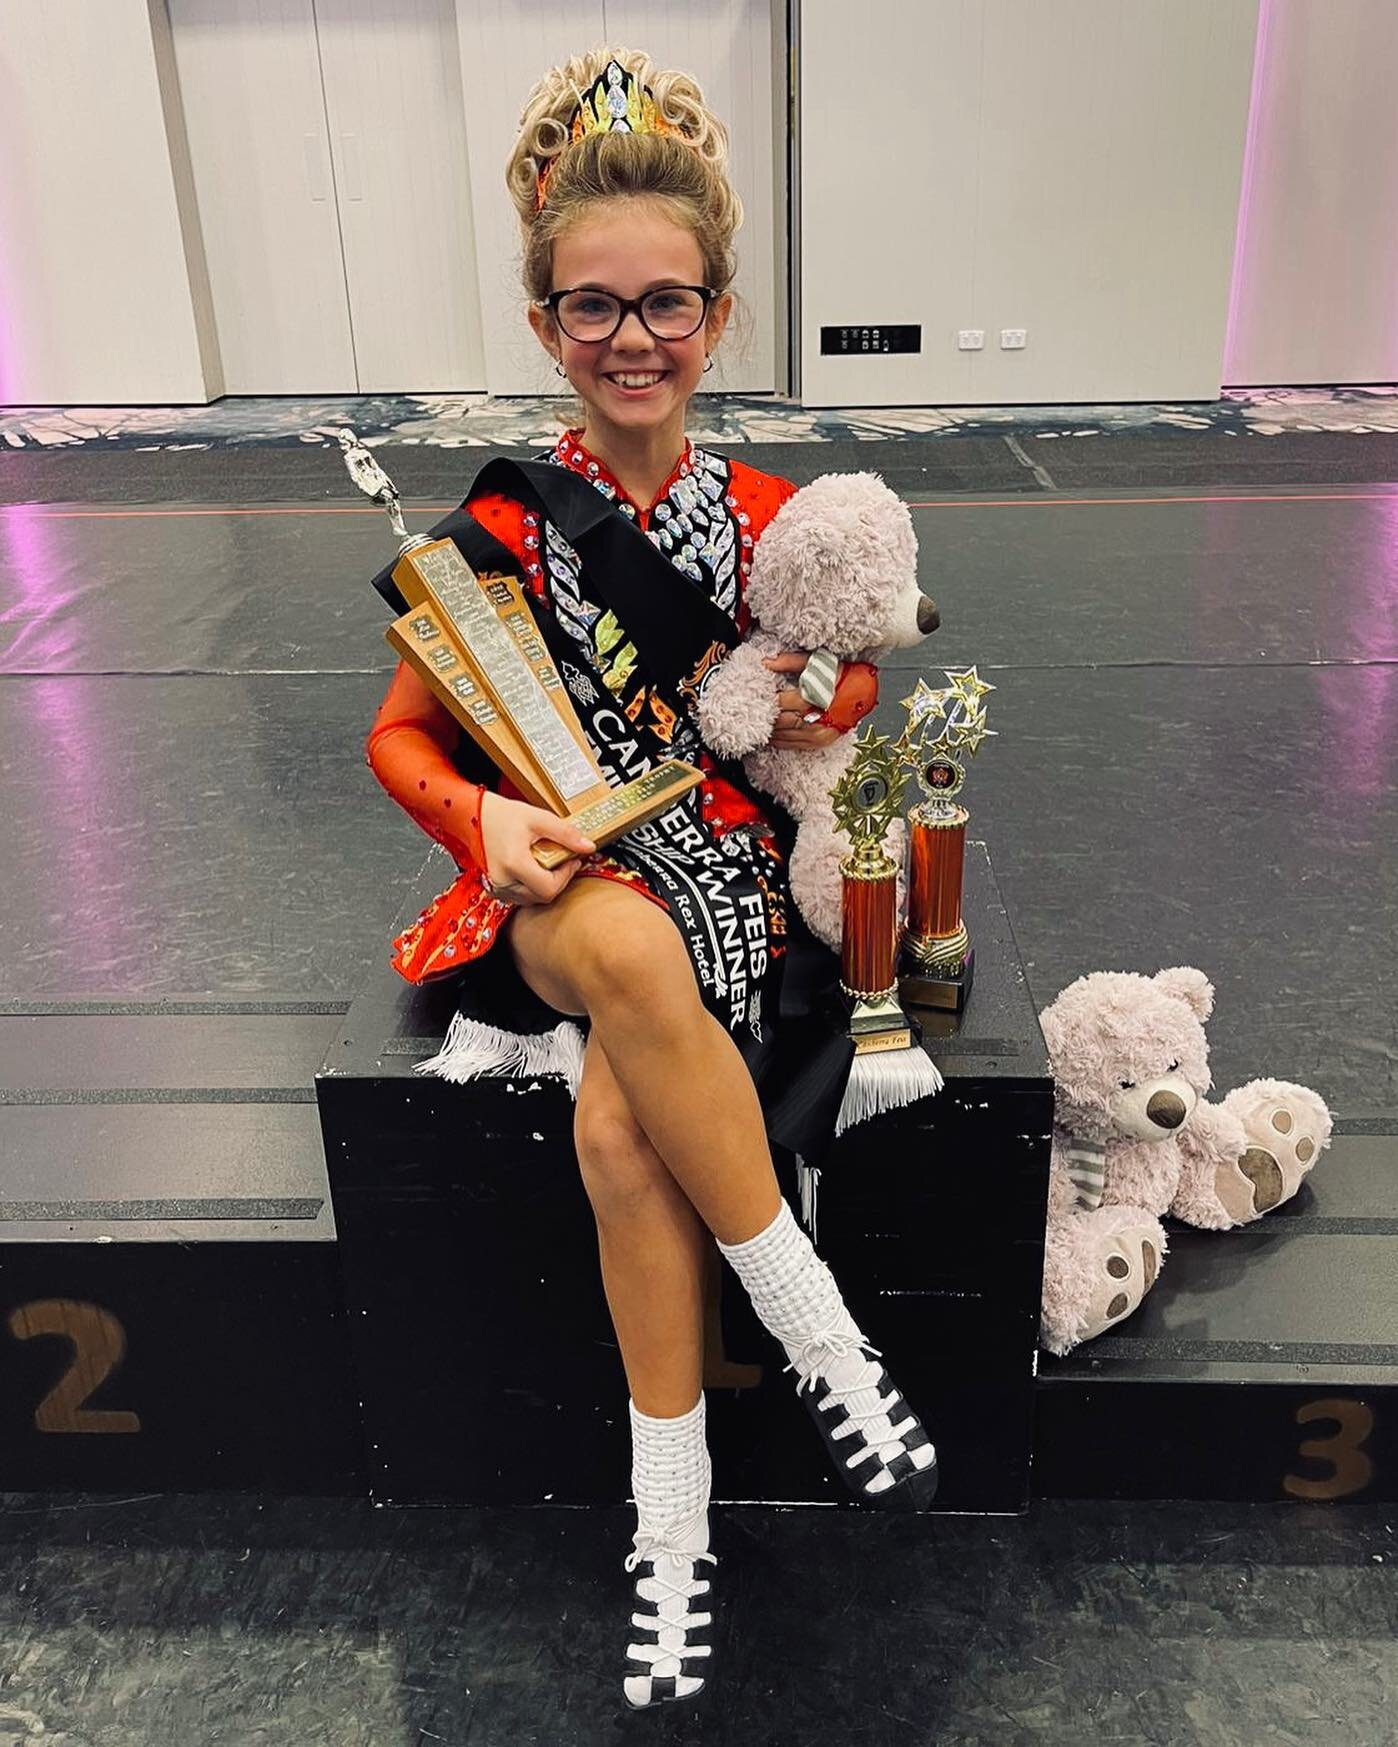 Thrilled to be on the top block at the Canberra Feis today! Well done Sadbh 😍🏆🥇

#irishdance #irishdancing #canberra #canberrafeis